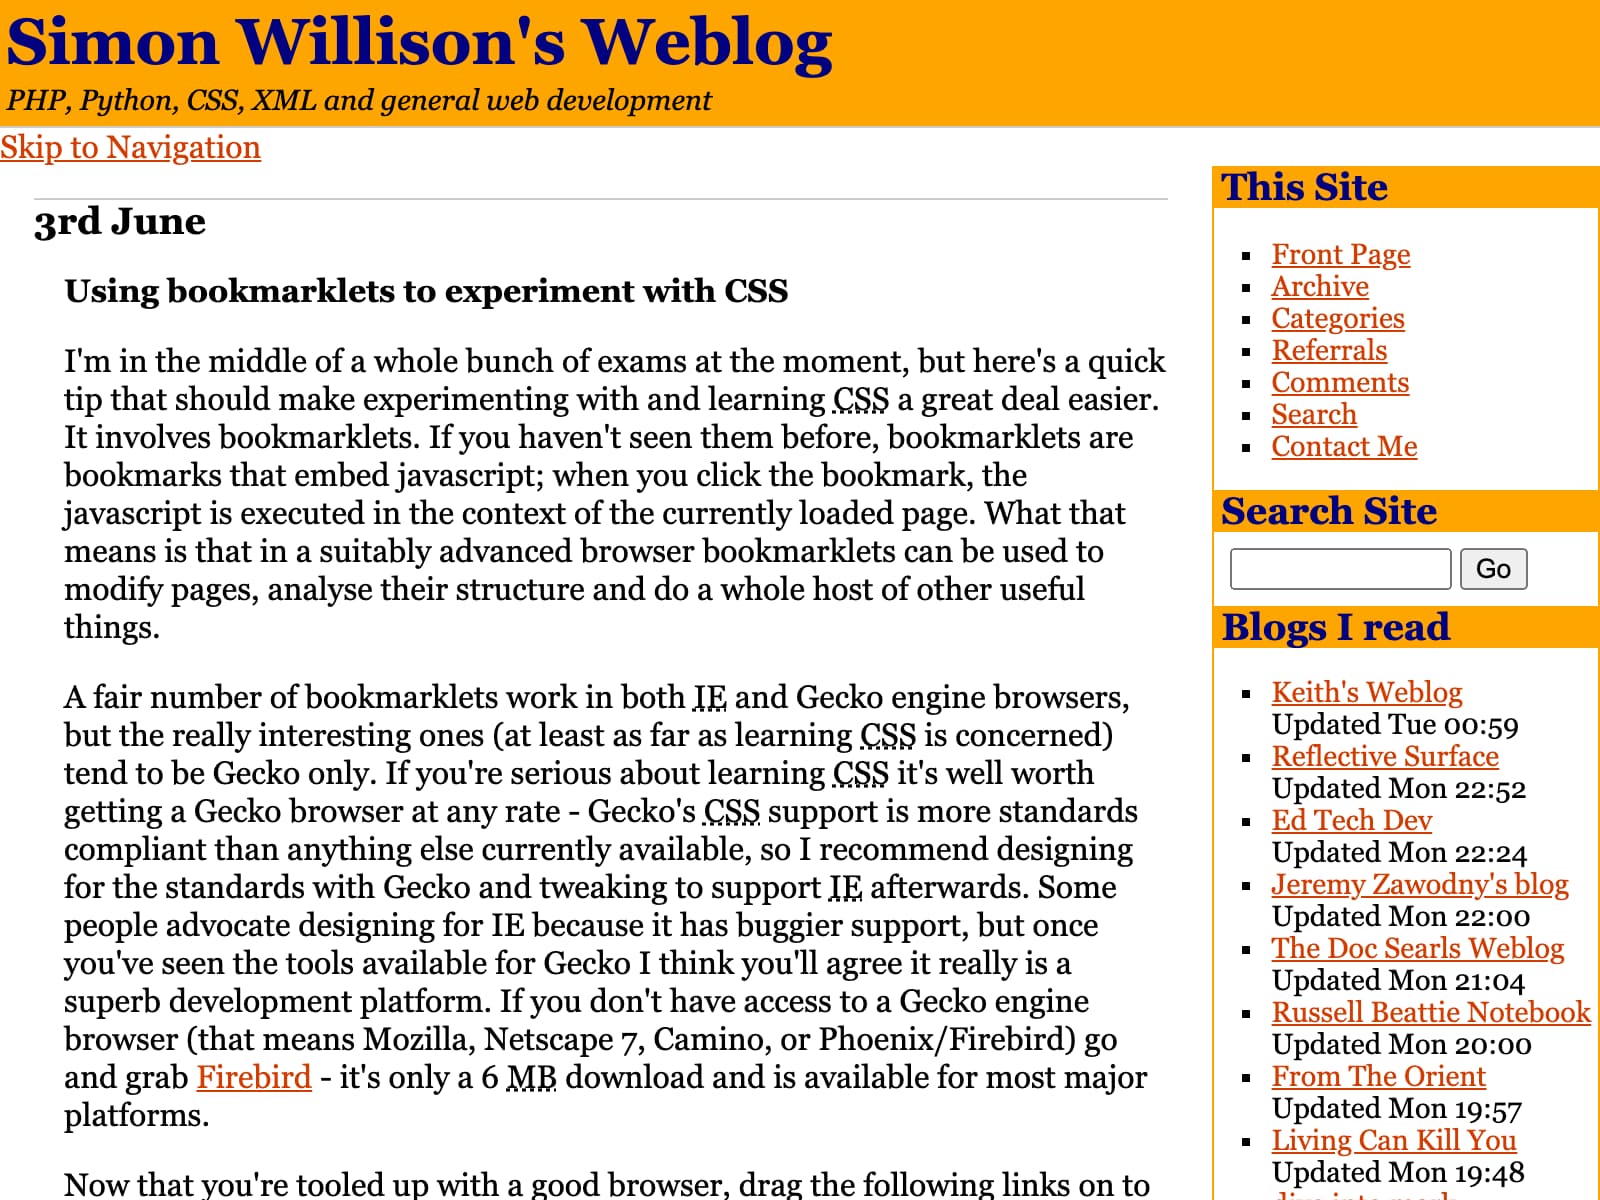 My blog in June 2003. The header and highlight colours were orange, the rest was black on white text. The tagline reads: PHP, PYthon, CSS, XML and general web development. The sidebar includes a "Blogs I read" section with notes as to when each one was last updated. My top post that day talks about Using boomarklets to experiment with CSS.